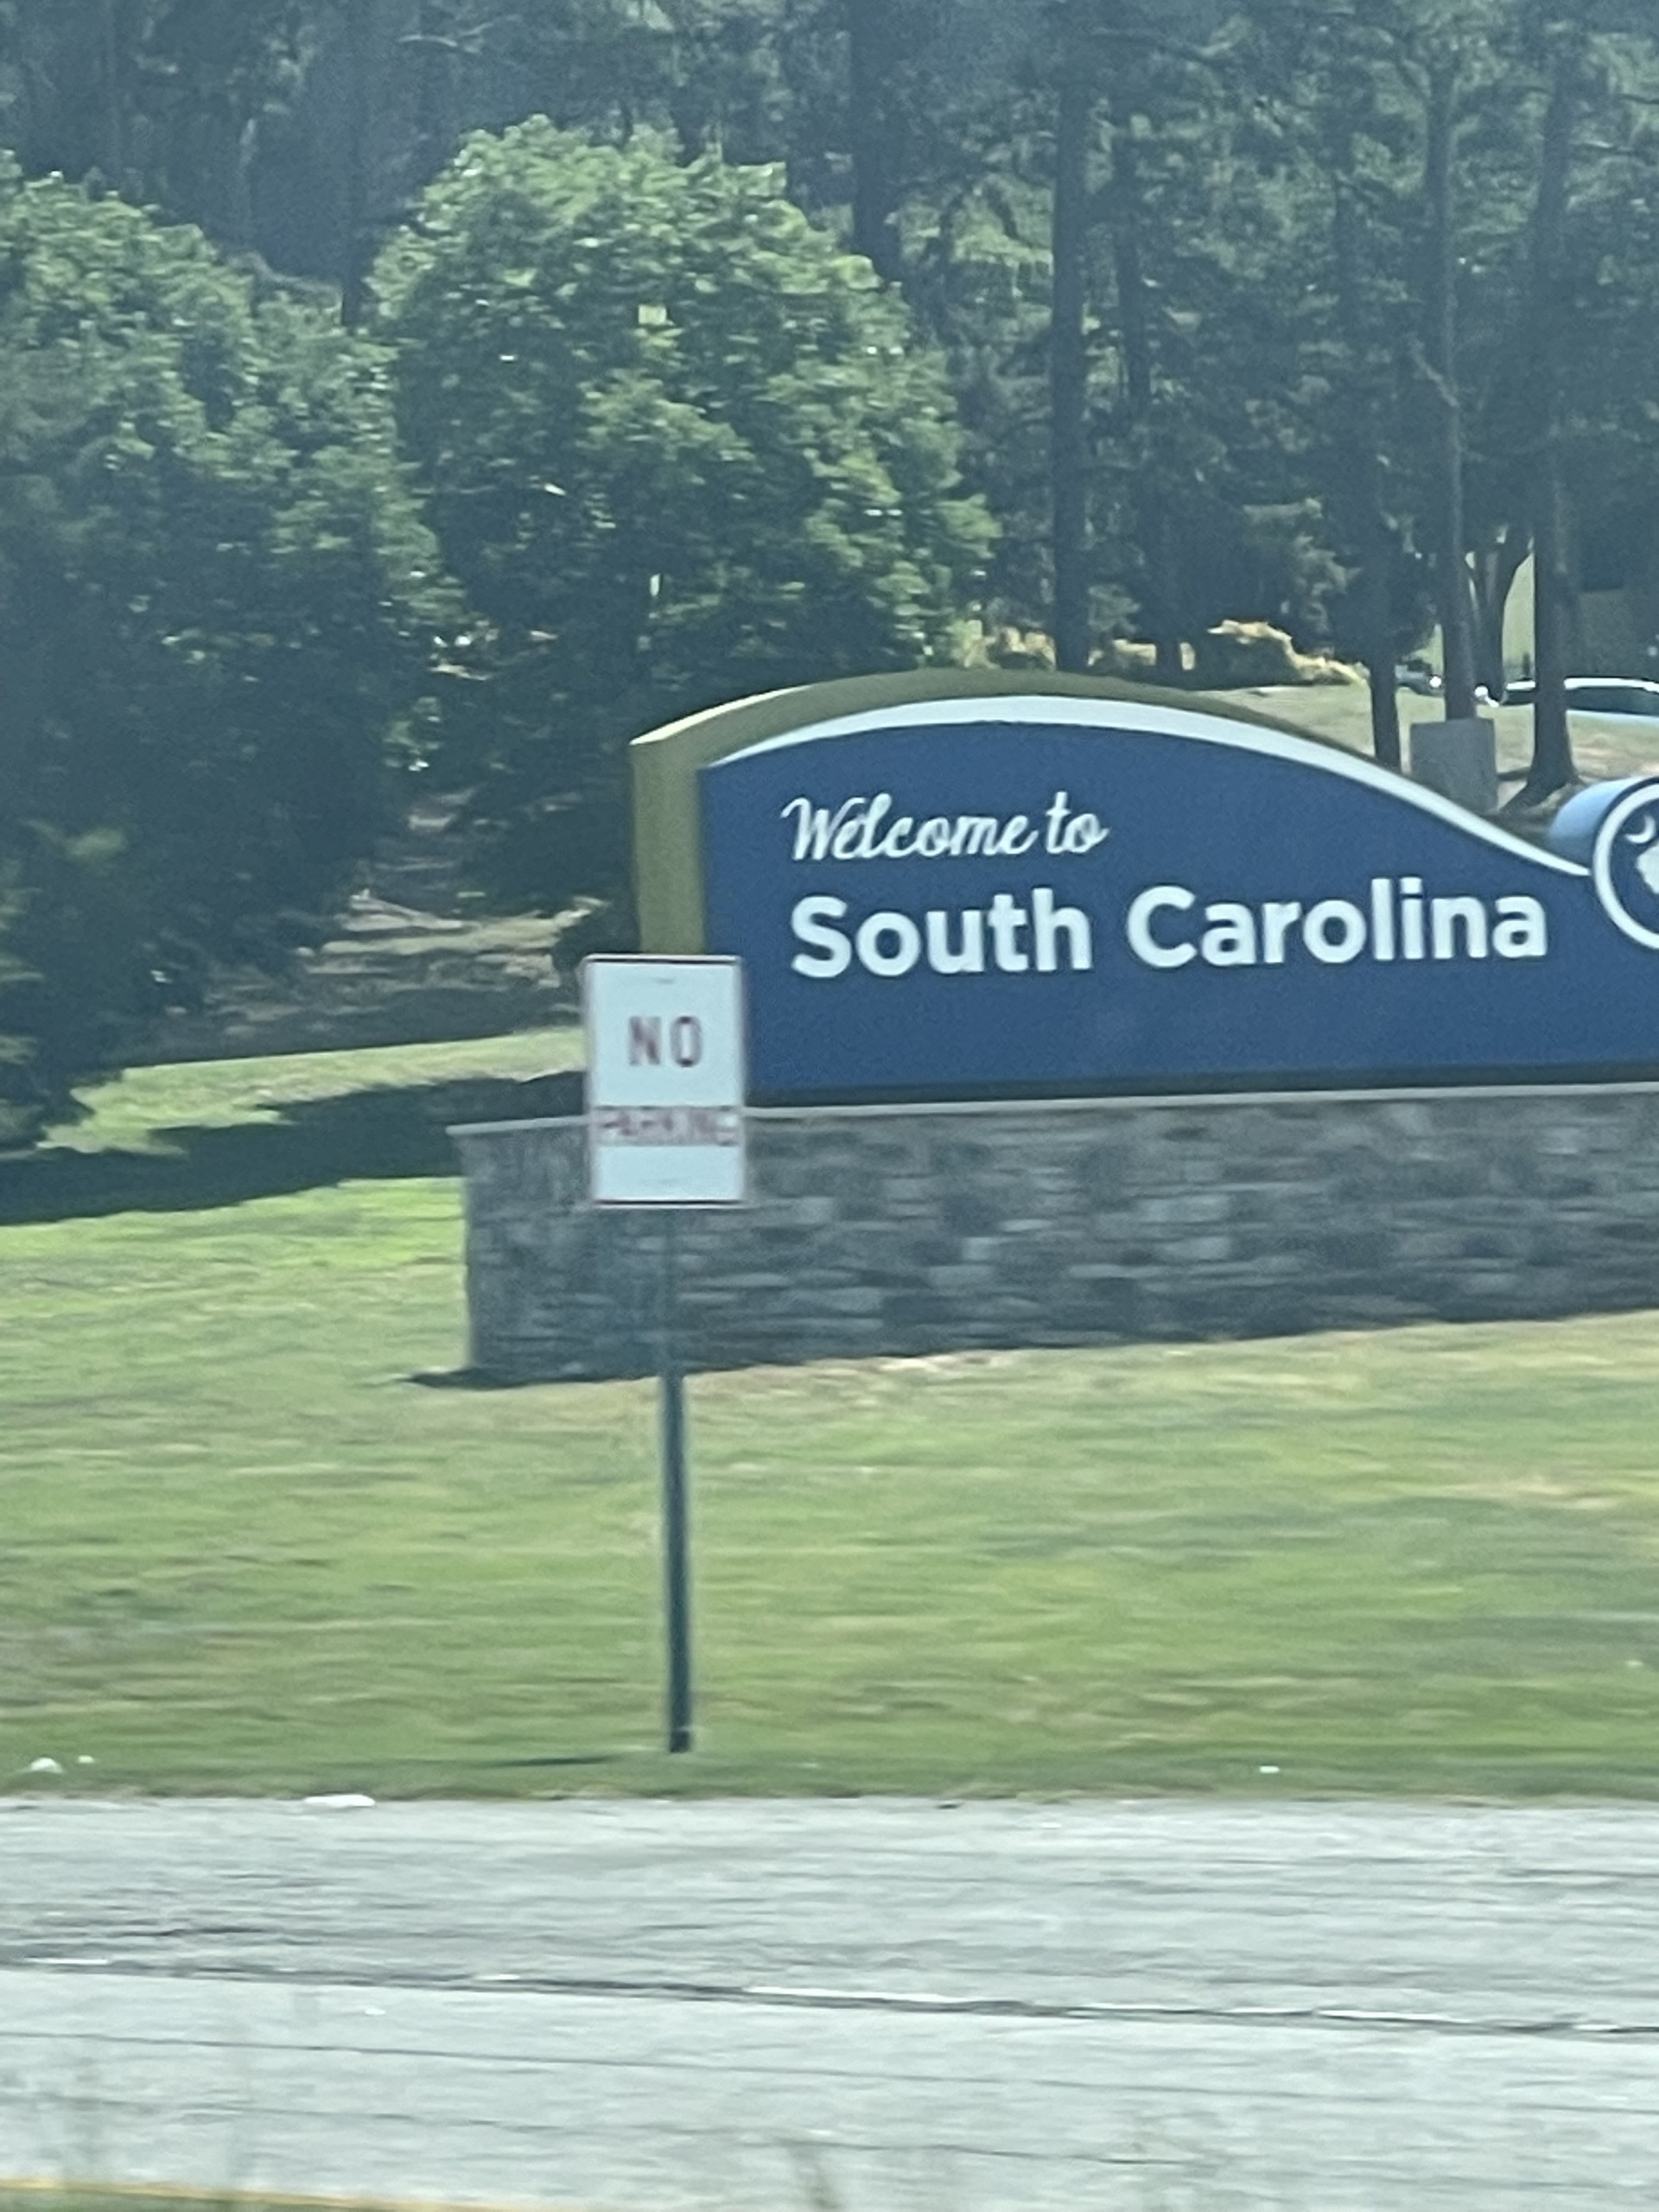 where to stop on a cross-country road trip, best places to stop on a cross country road trip, cross country road trip, west coast to east coast road trip, erin busbee, traveling with kids, how to travel with kids, how to travel with a dog, cross country road trip with kids, south carolina welcome sign